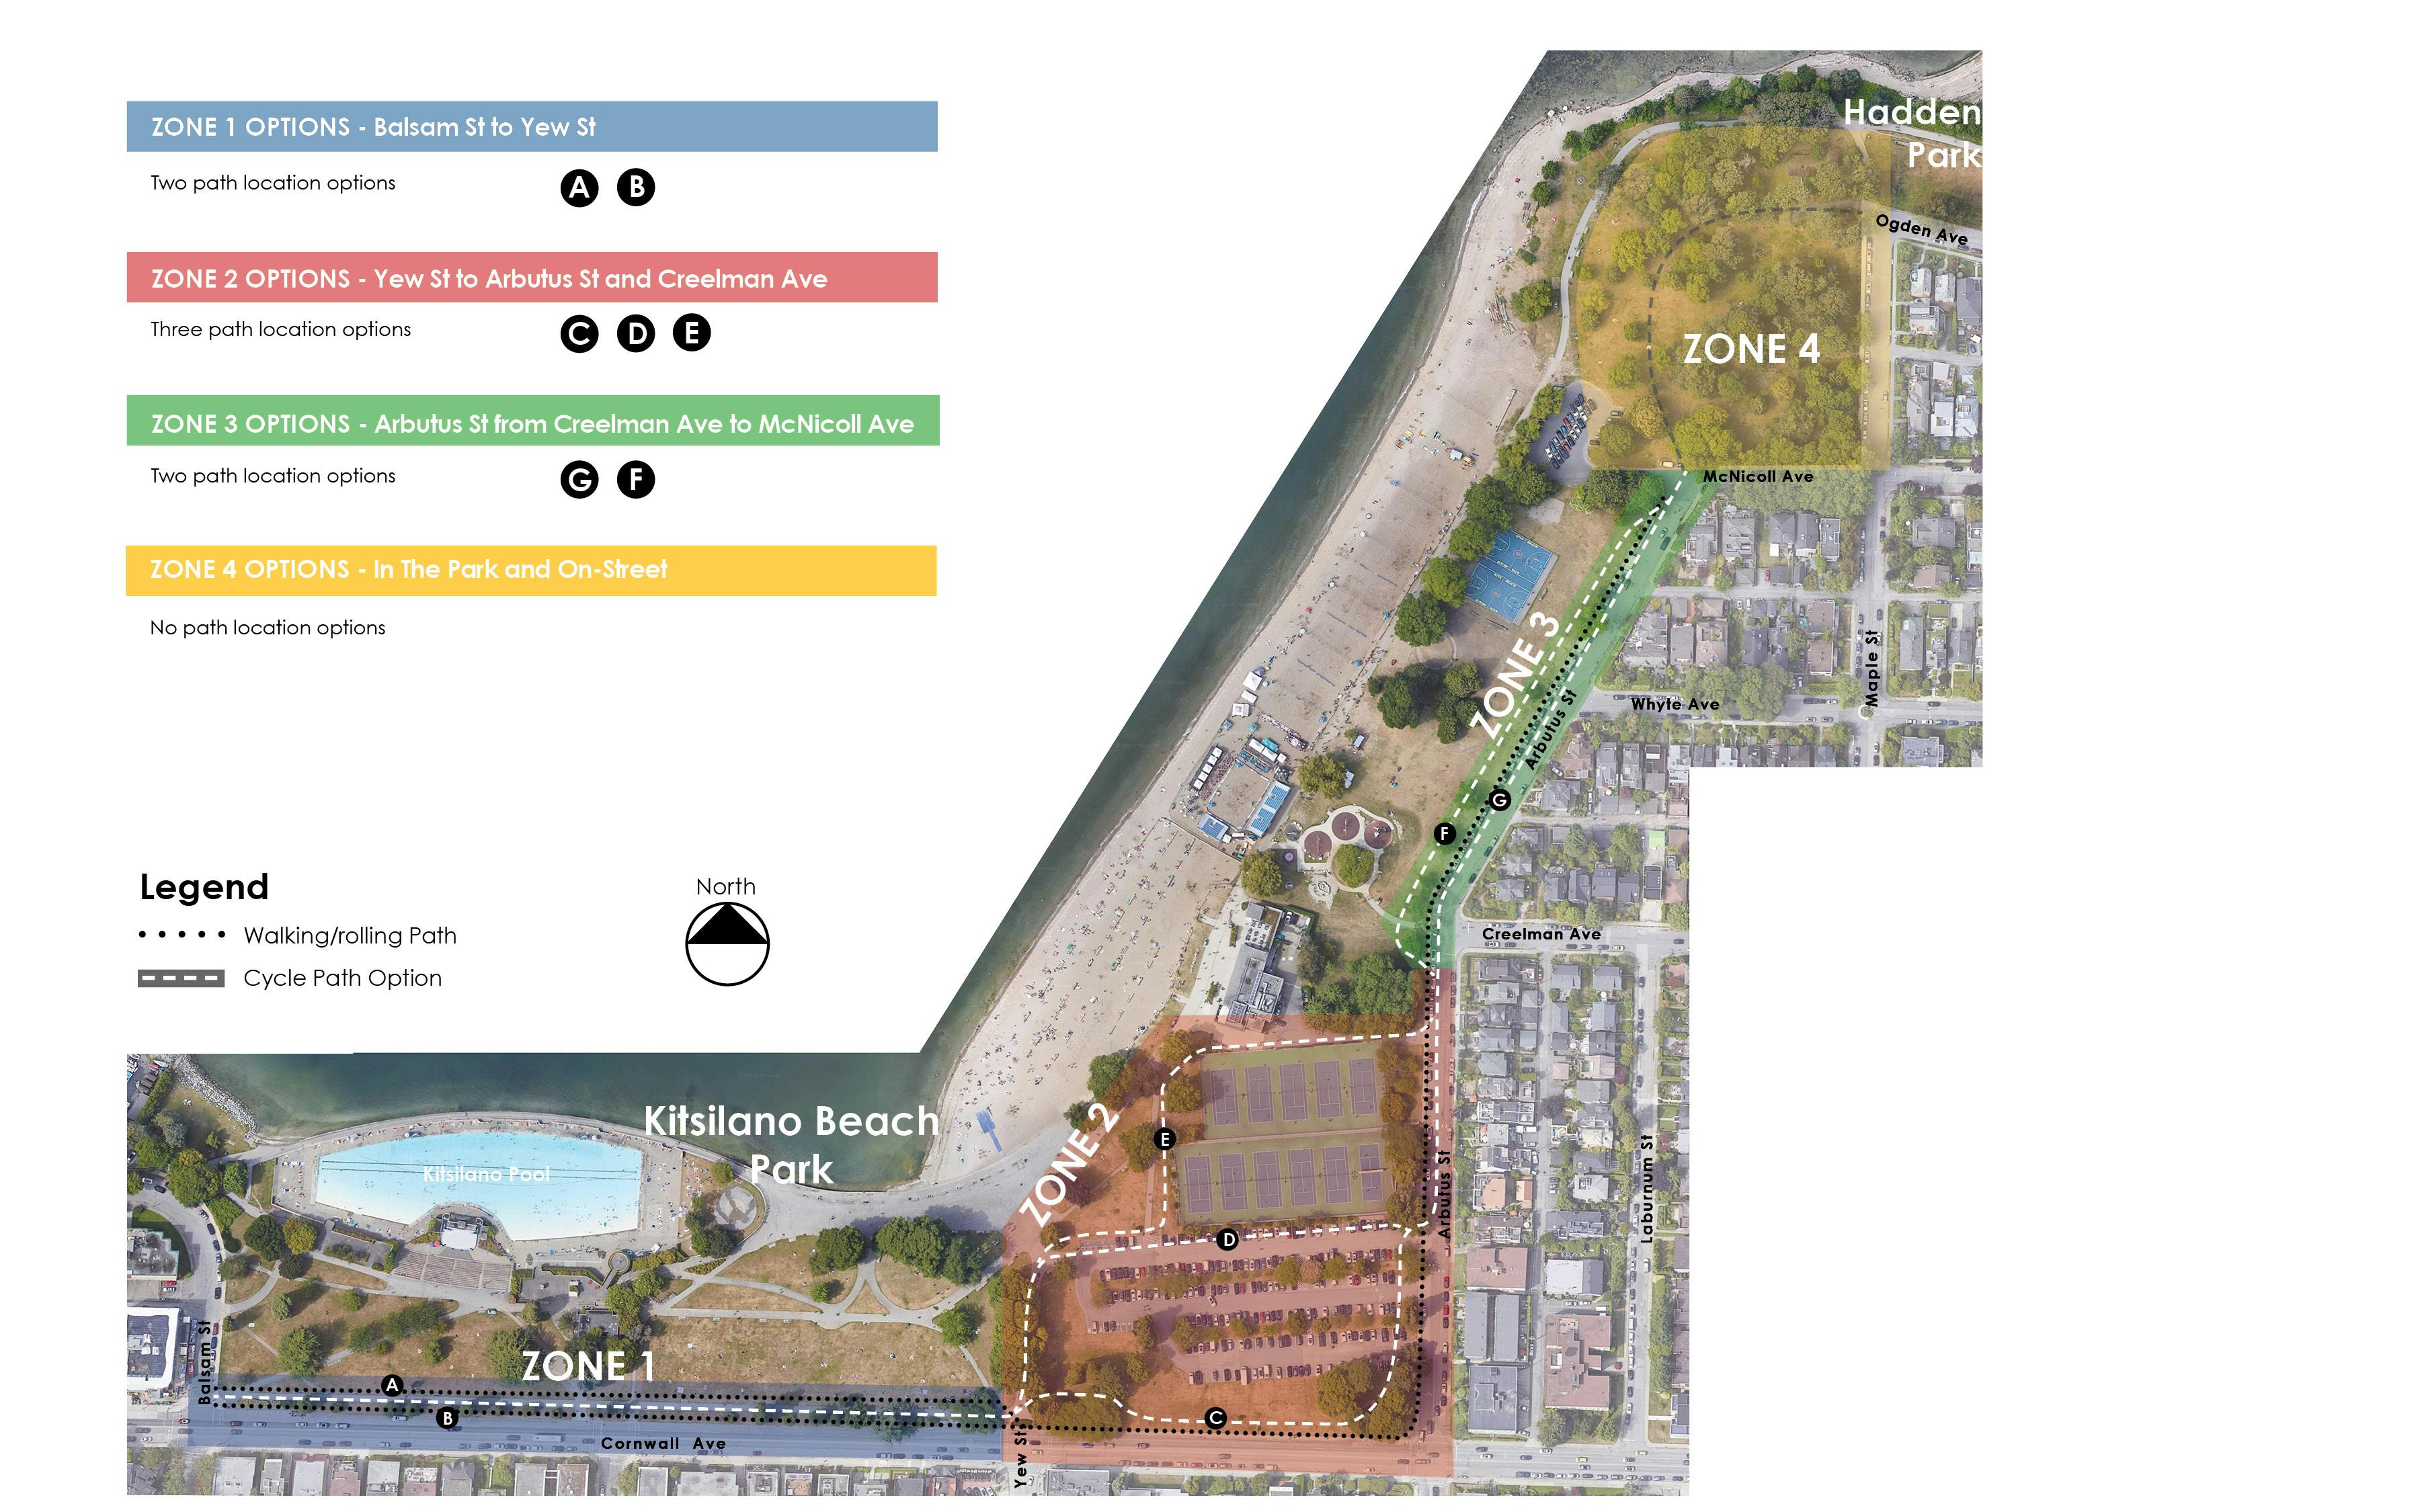 Aerial view map of Kitsilano Beach Park showing different cycle path route options in four zones across different areas of the park.